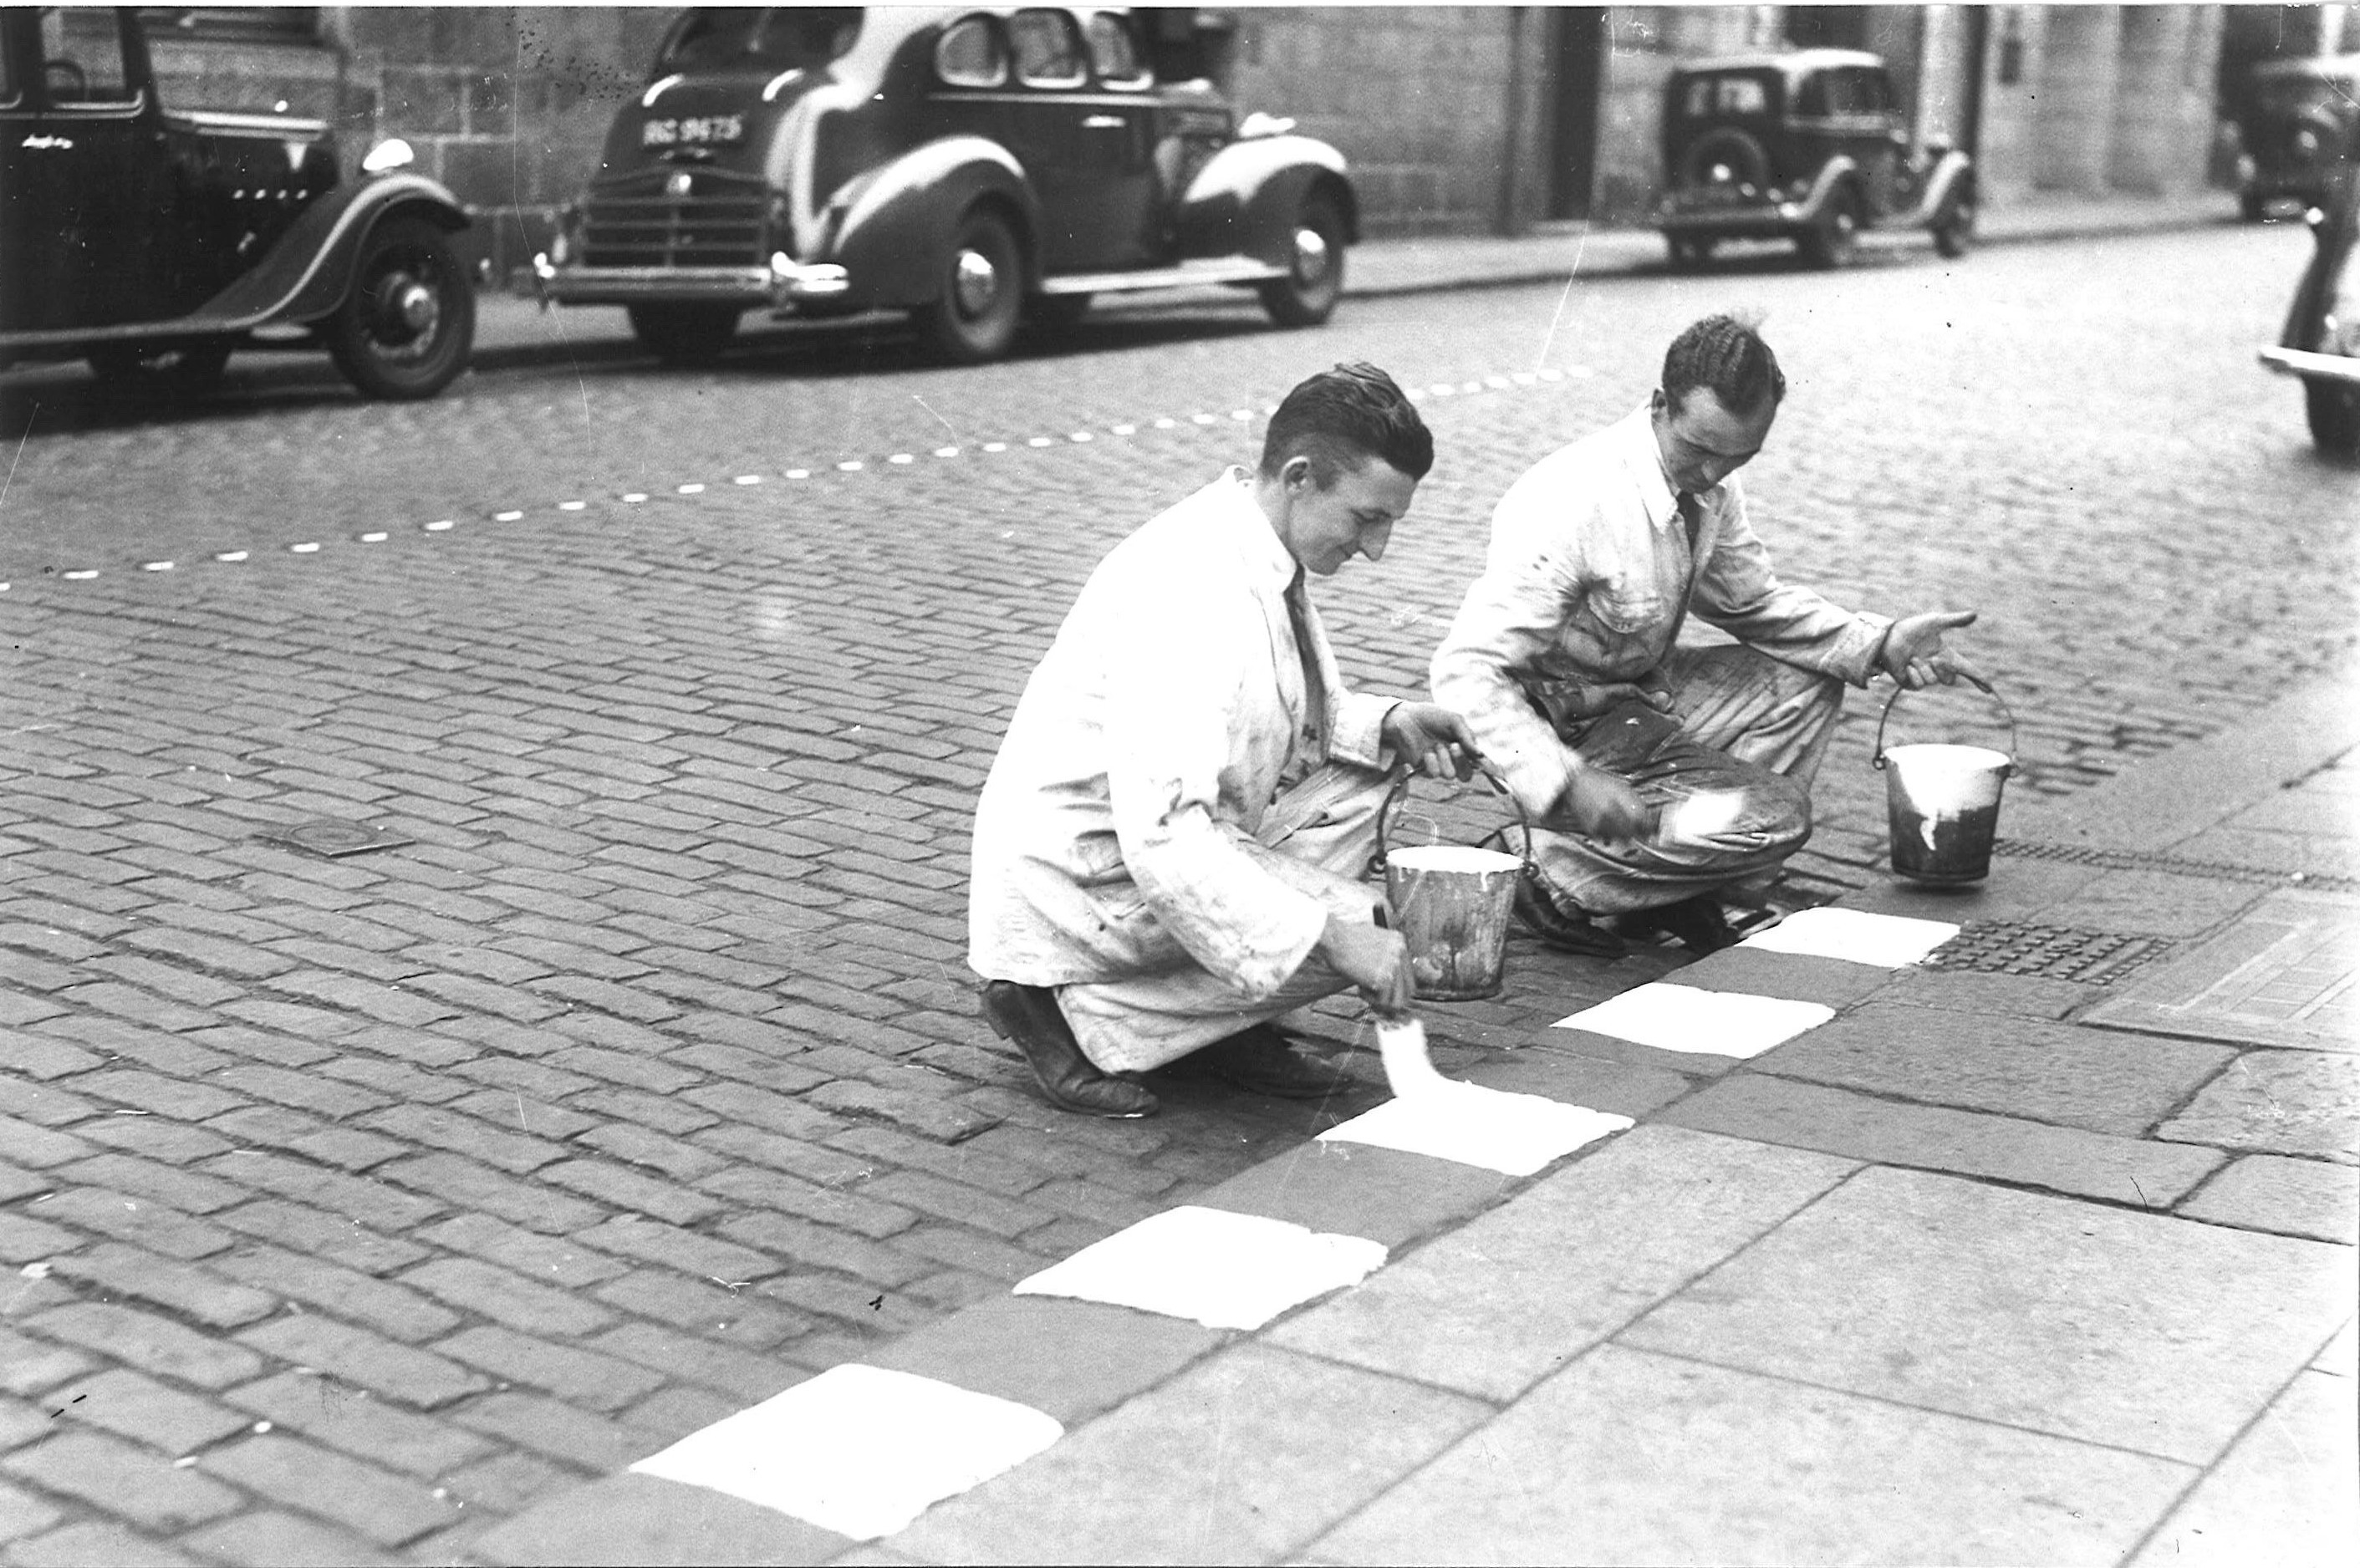 Pavements' edges were painted so they could be seen during blackouts